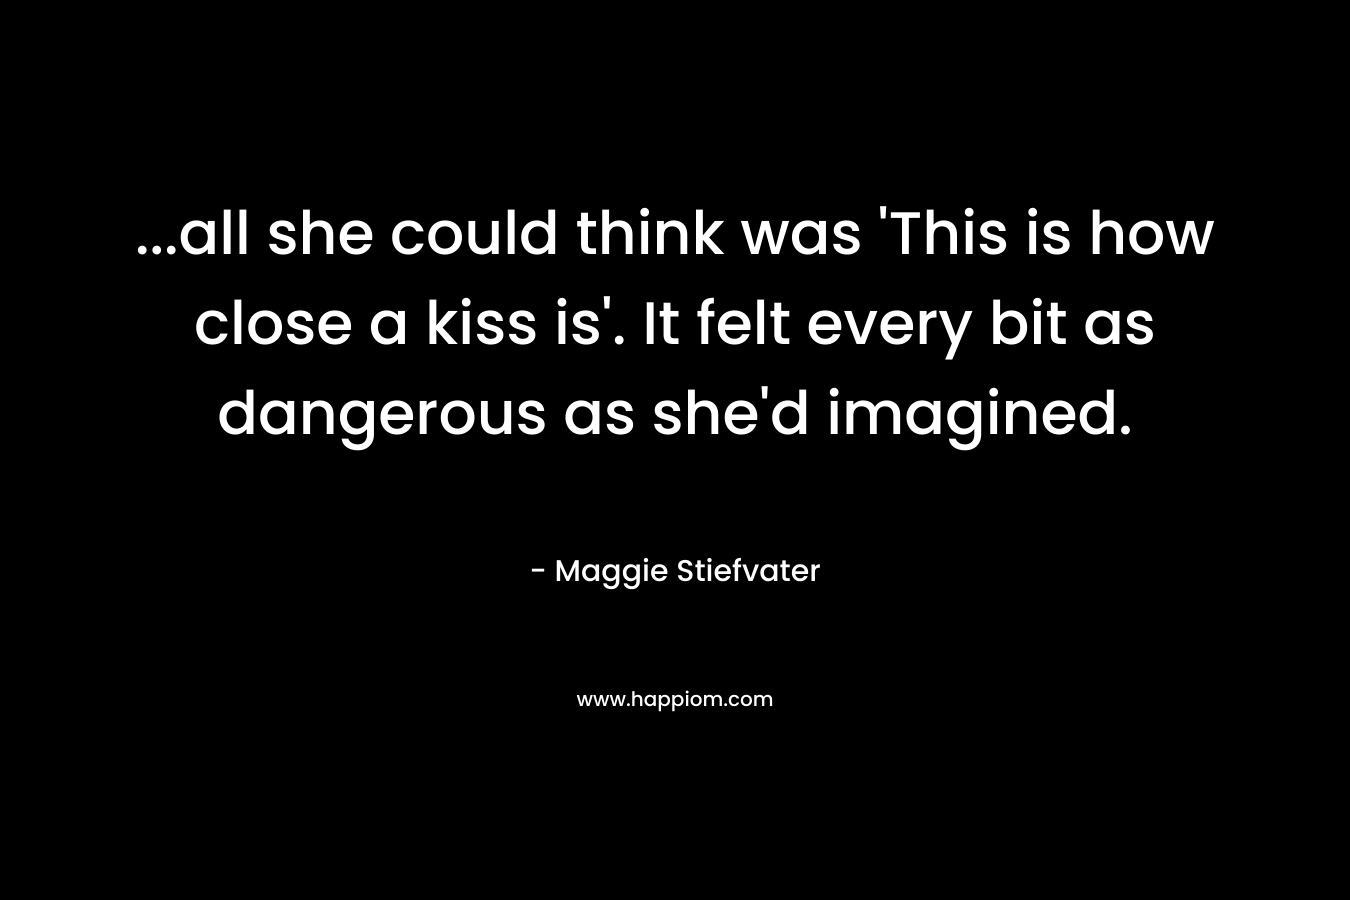 …all she could think was ‘This is how close a kiss is’. It felt every bit as dangerous as she’d imagined. – Maggie Stiefvater